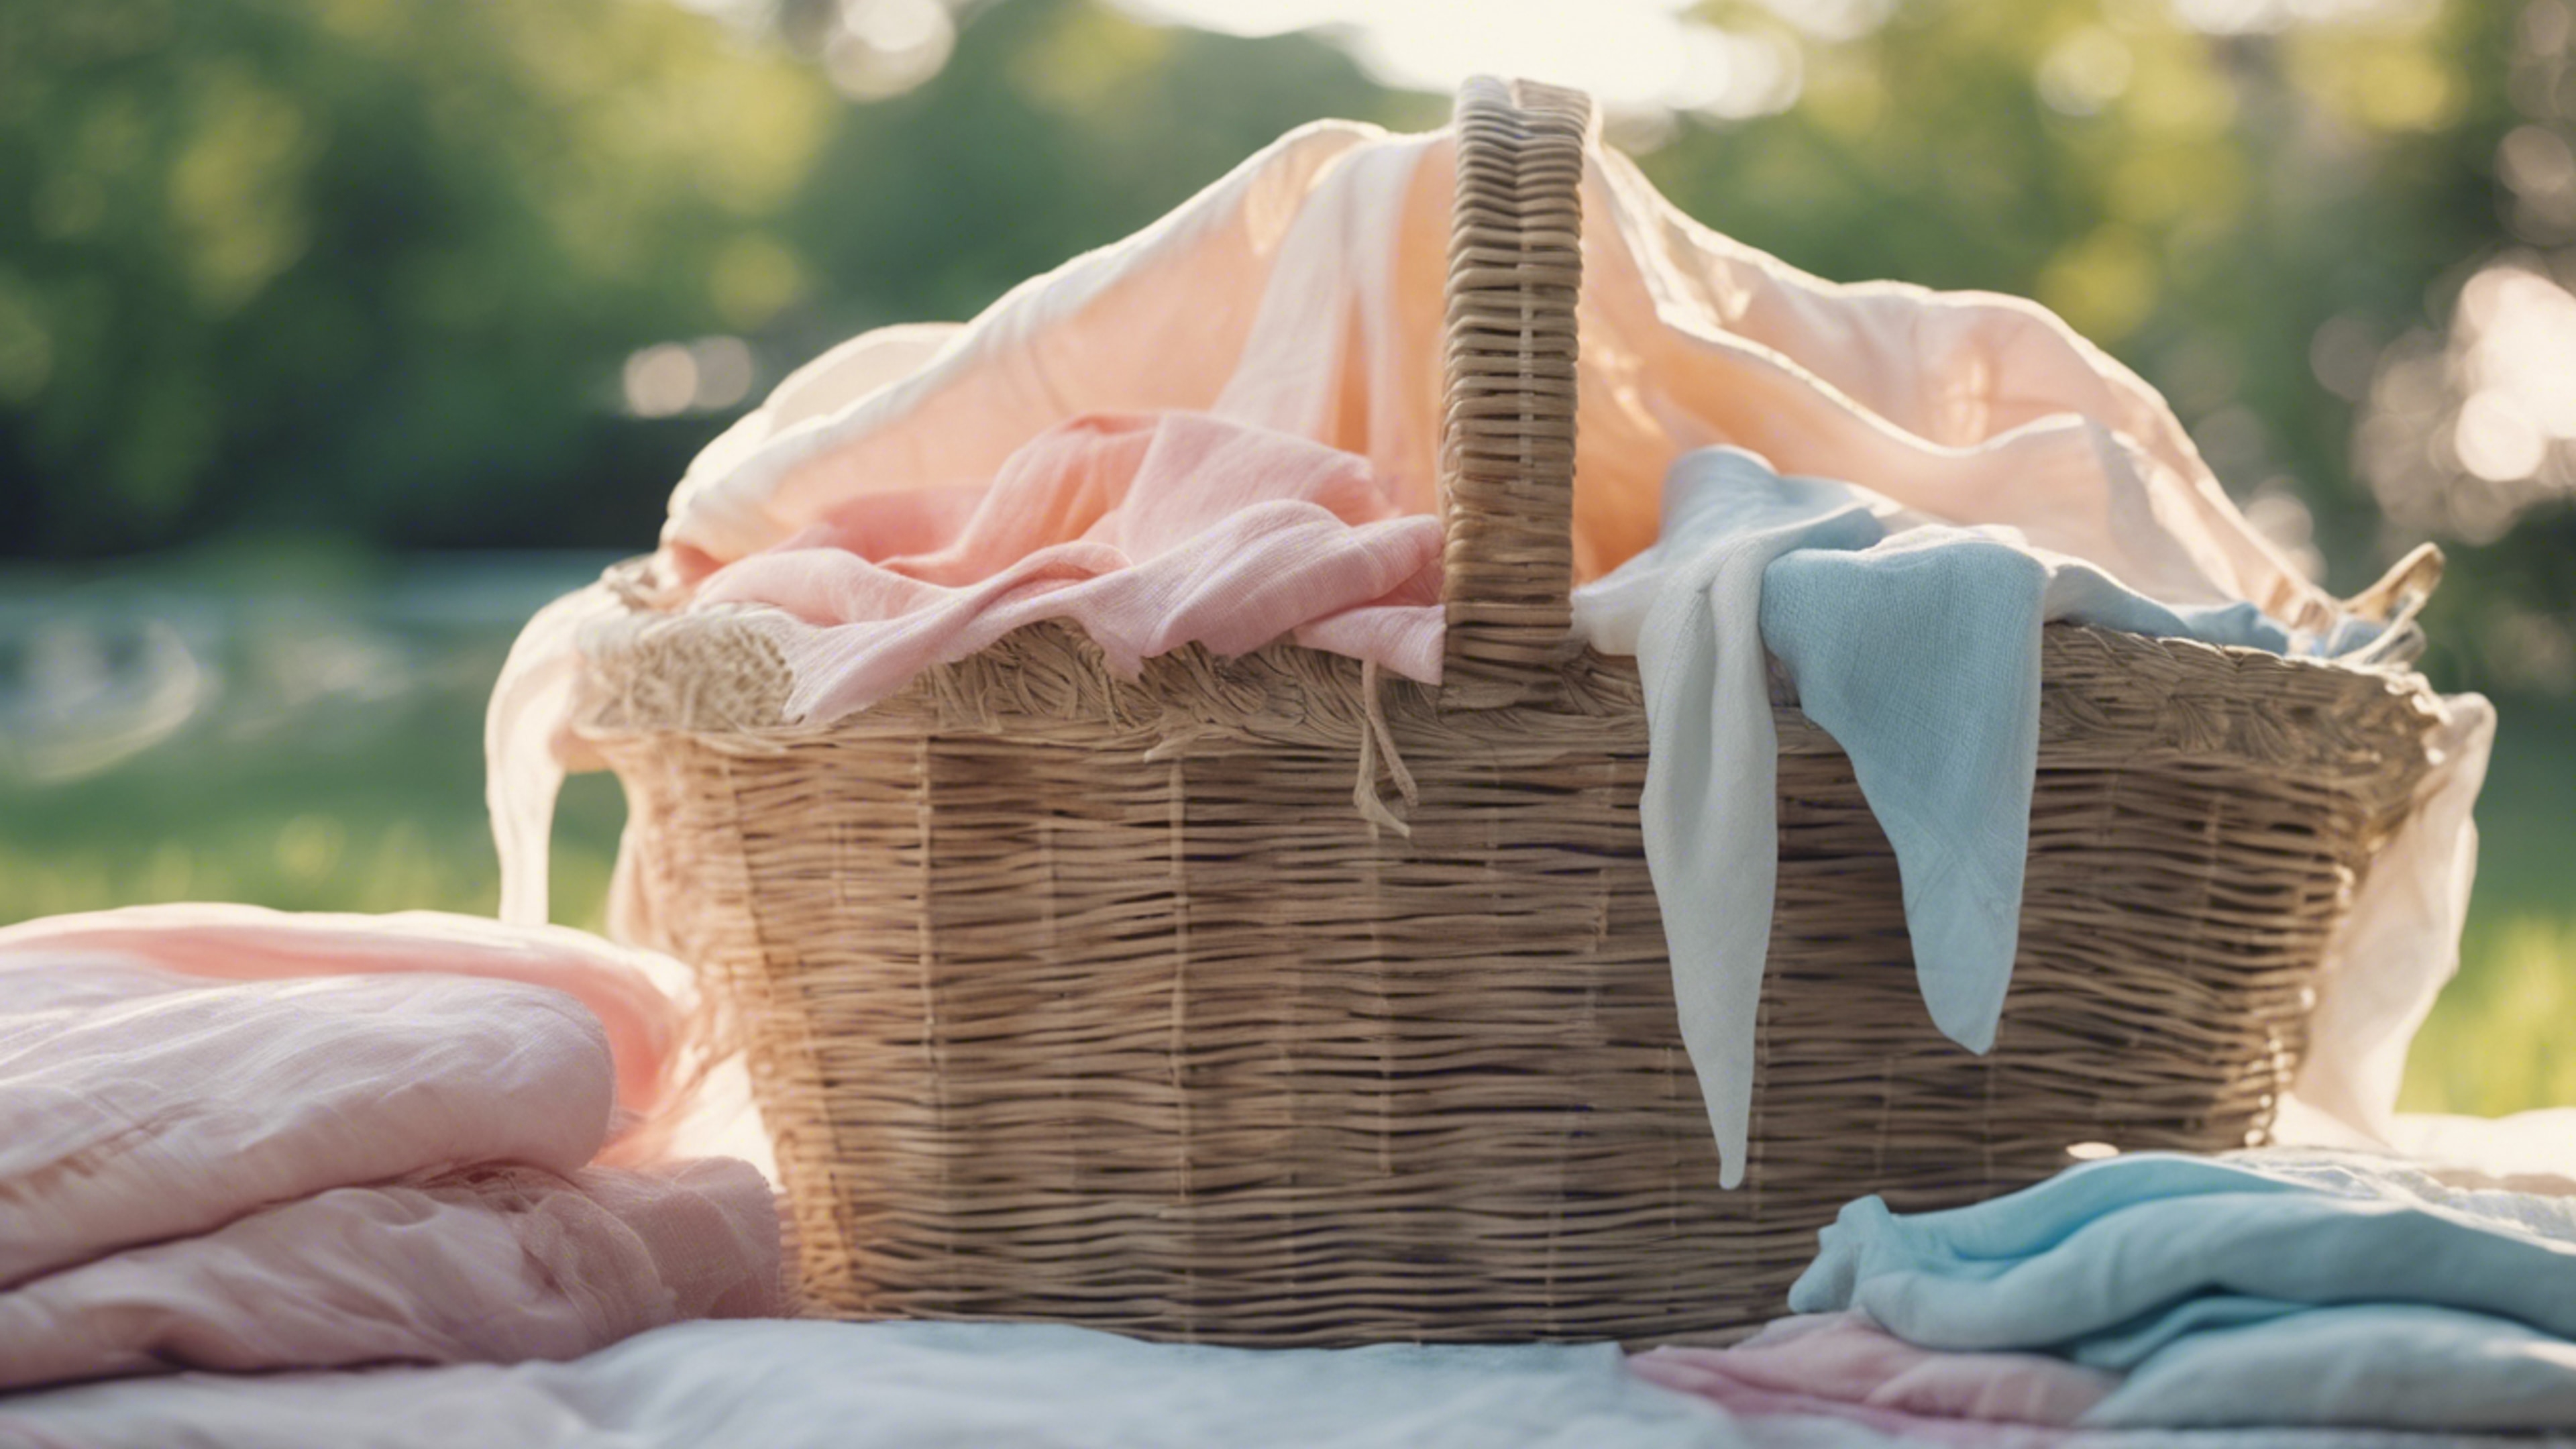 Baskets filled with freshly laundered, pastel-colored linens in the summer breeze.壁紙[fbe86aeed5ef45d2847e]